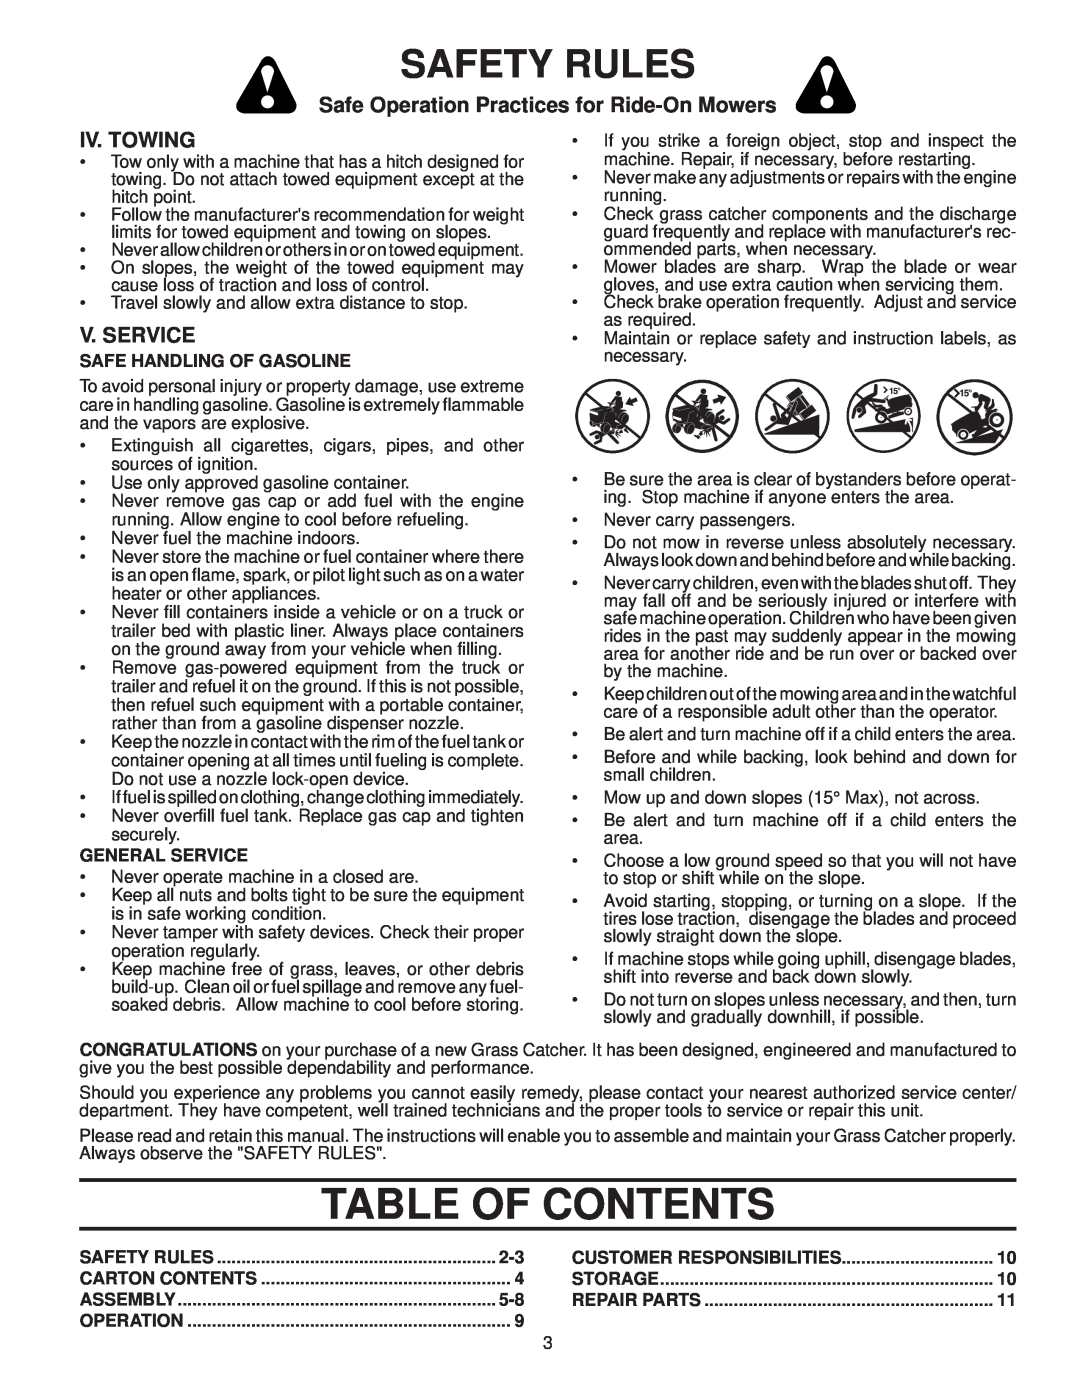 McCulloch H338HL Table Of Contents, Iv. Towing, V. Service, Safety Rules, Safe Operation Practices for Ride-OnMowers 